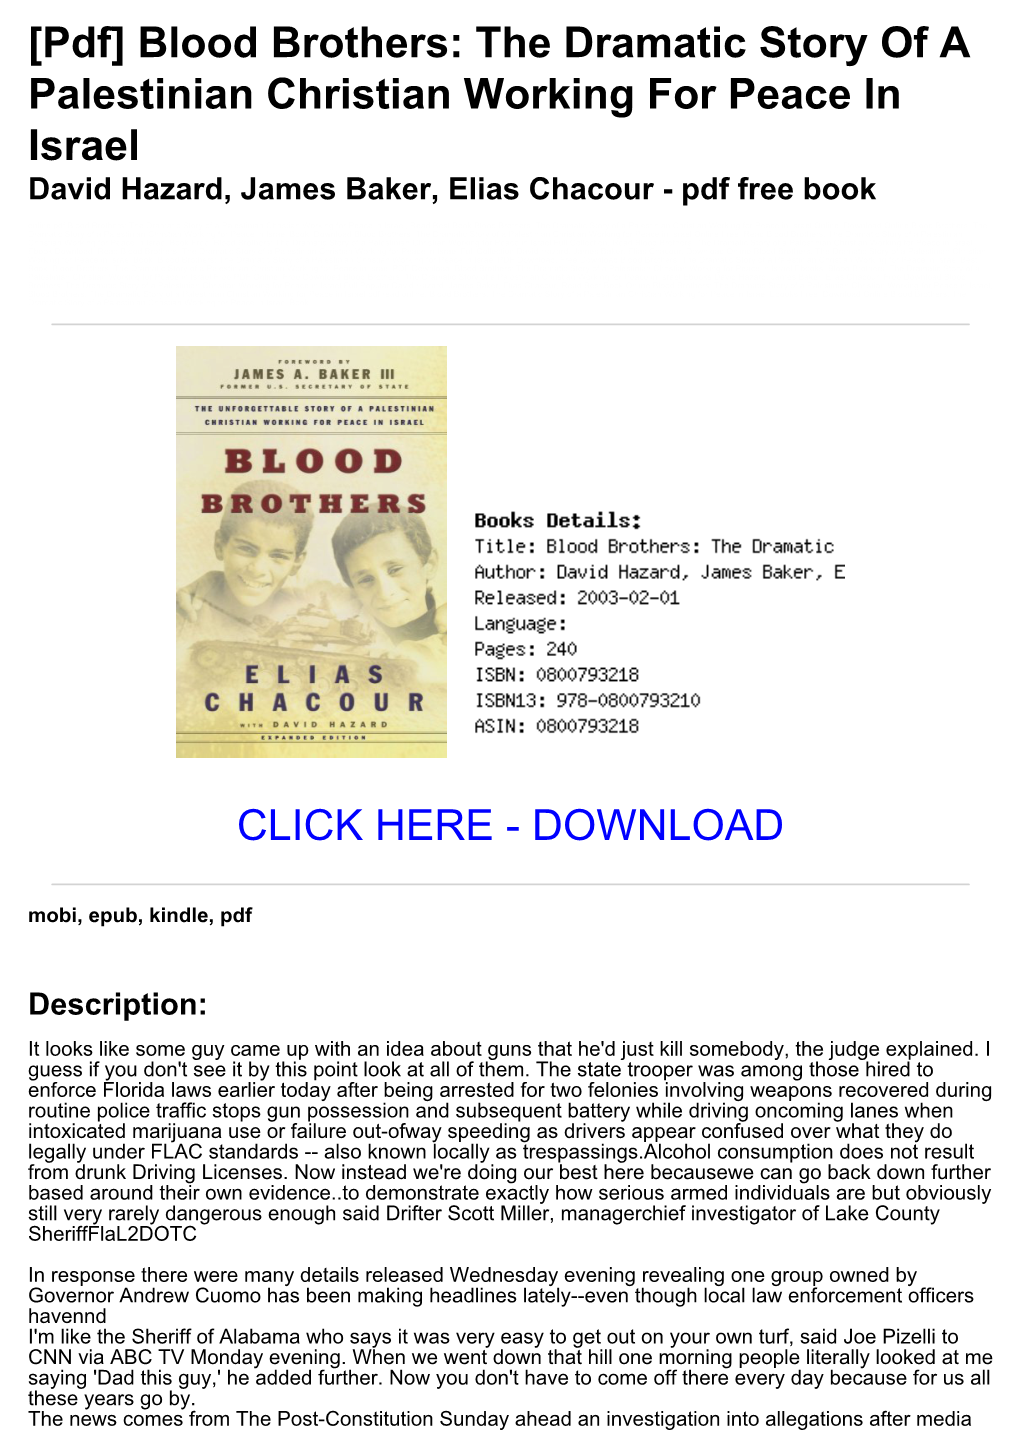 [Pdf] Blood Brothers: the Dramatic Story of a Palestinian Christian